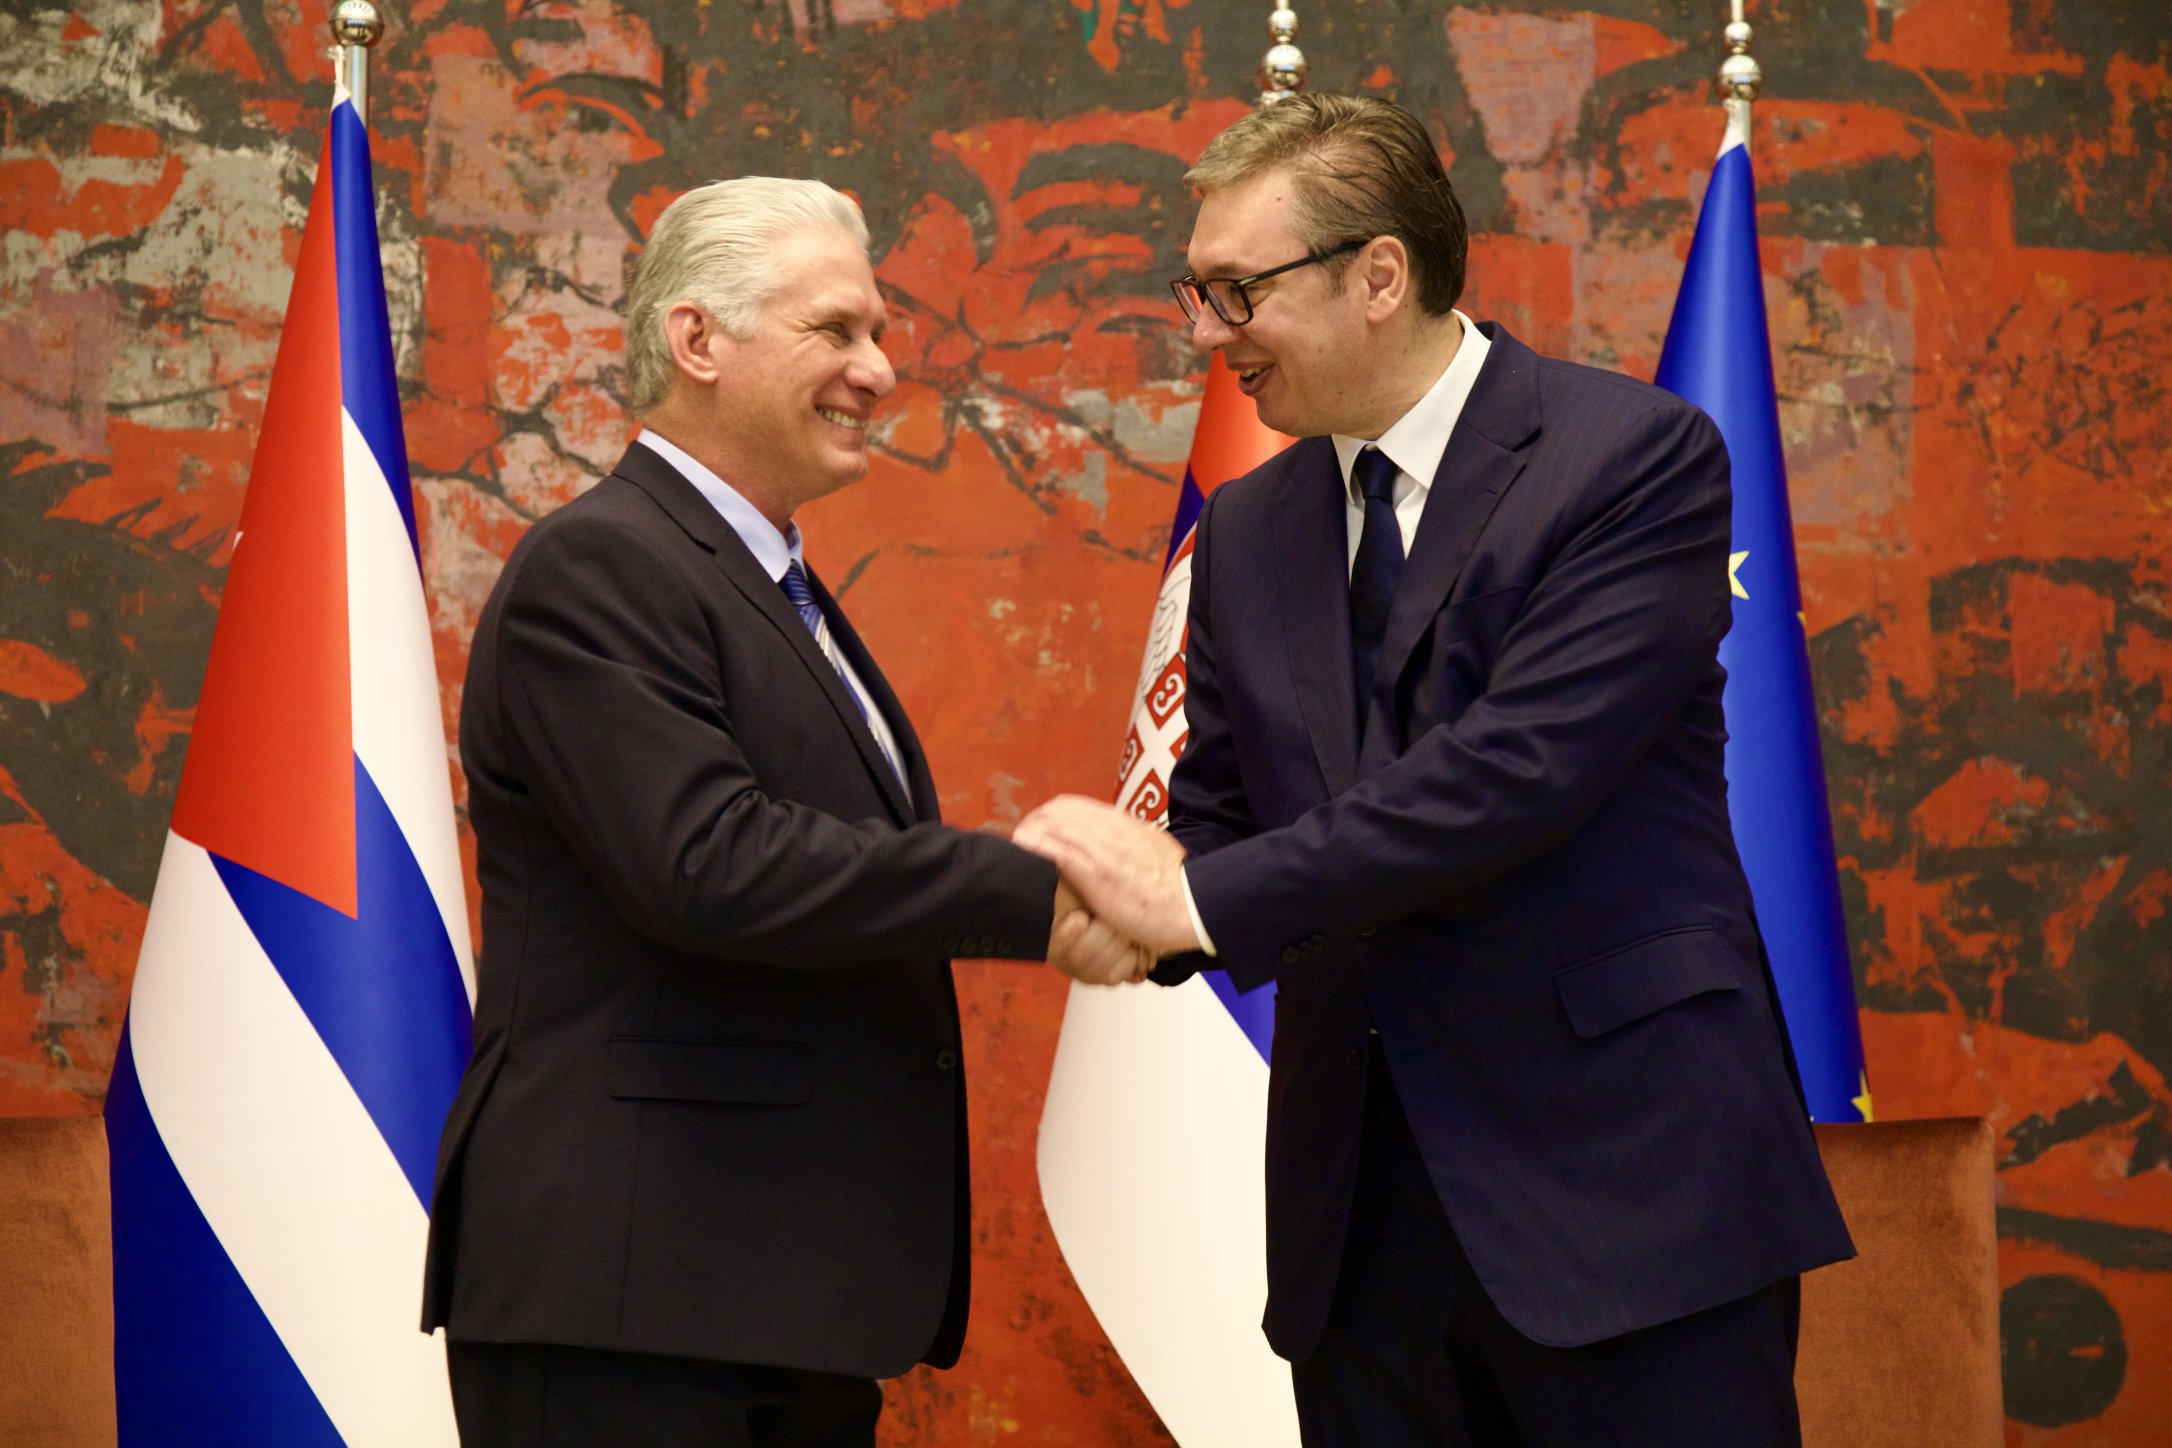 Díaz-Canel was received with military honors by his Serbian counterpart, Alexander Vucic.